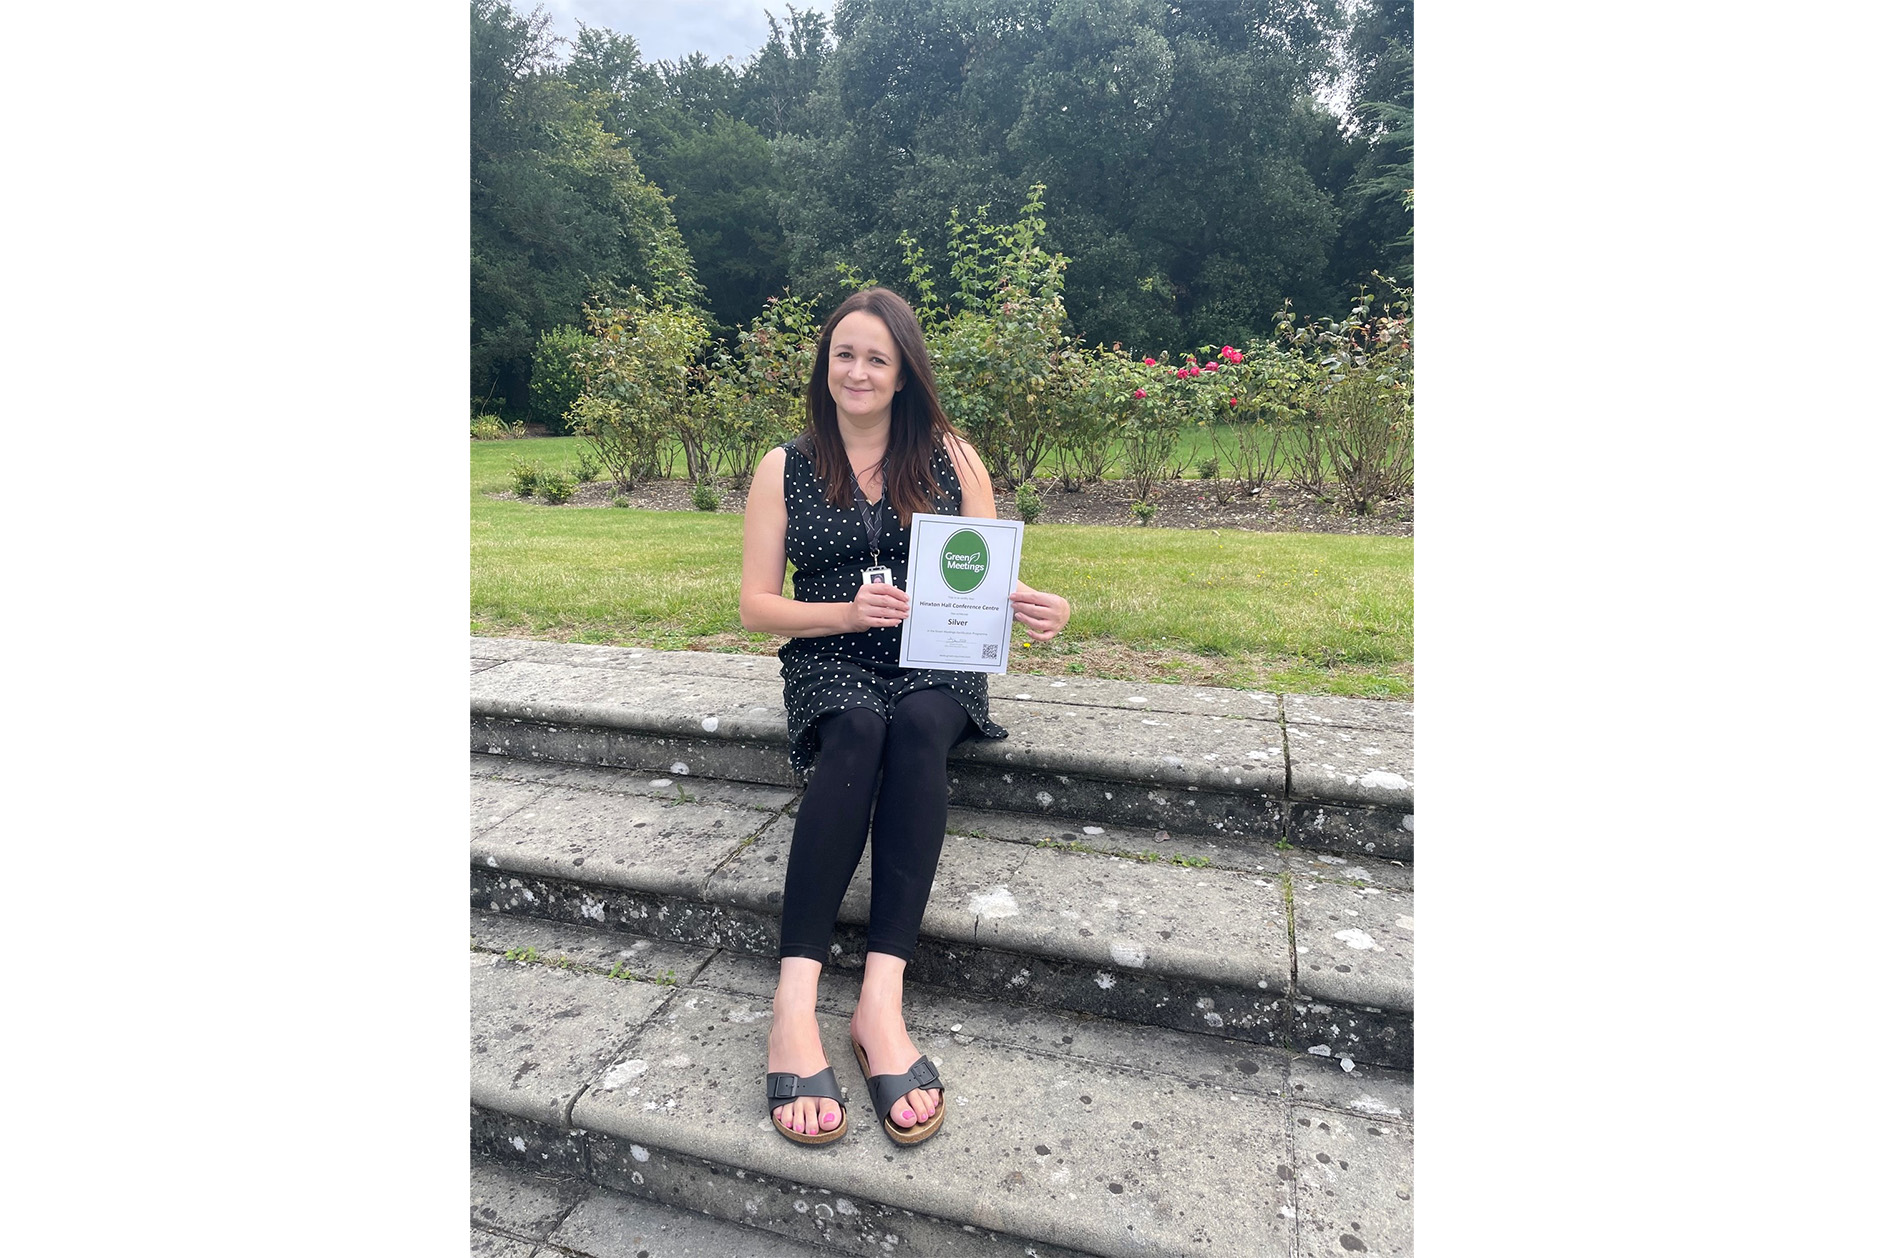 Kelly Butler, Business and Events Senior Manager, sat on steps on Hinxton Hall lawns holding Green Tourism award certificate